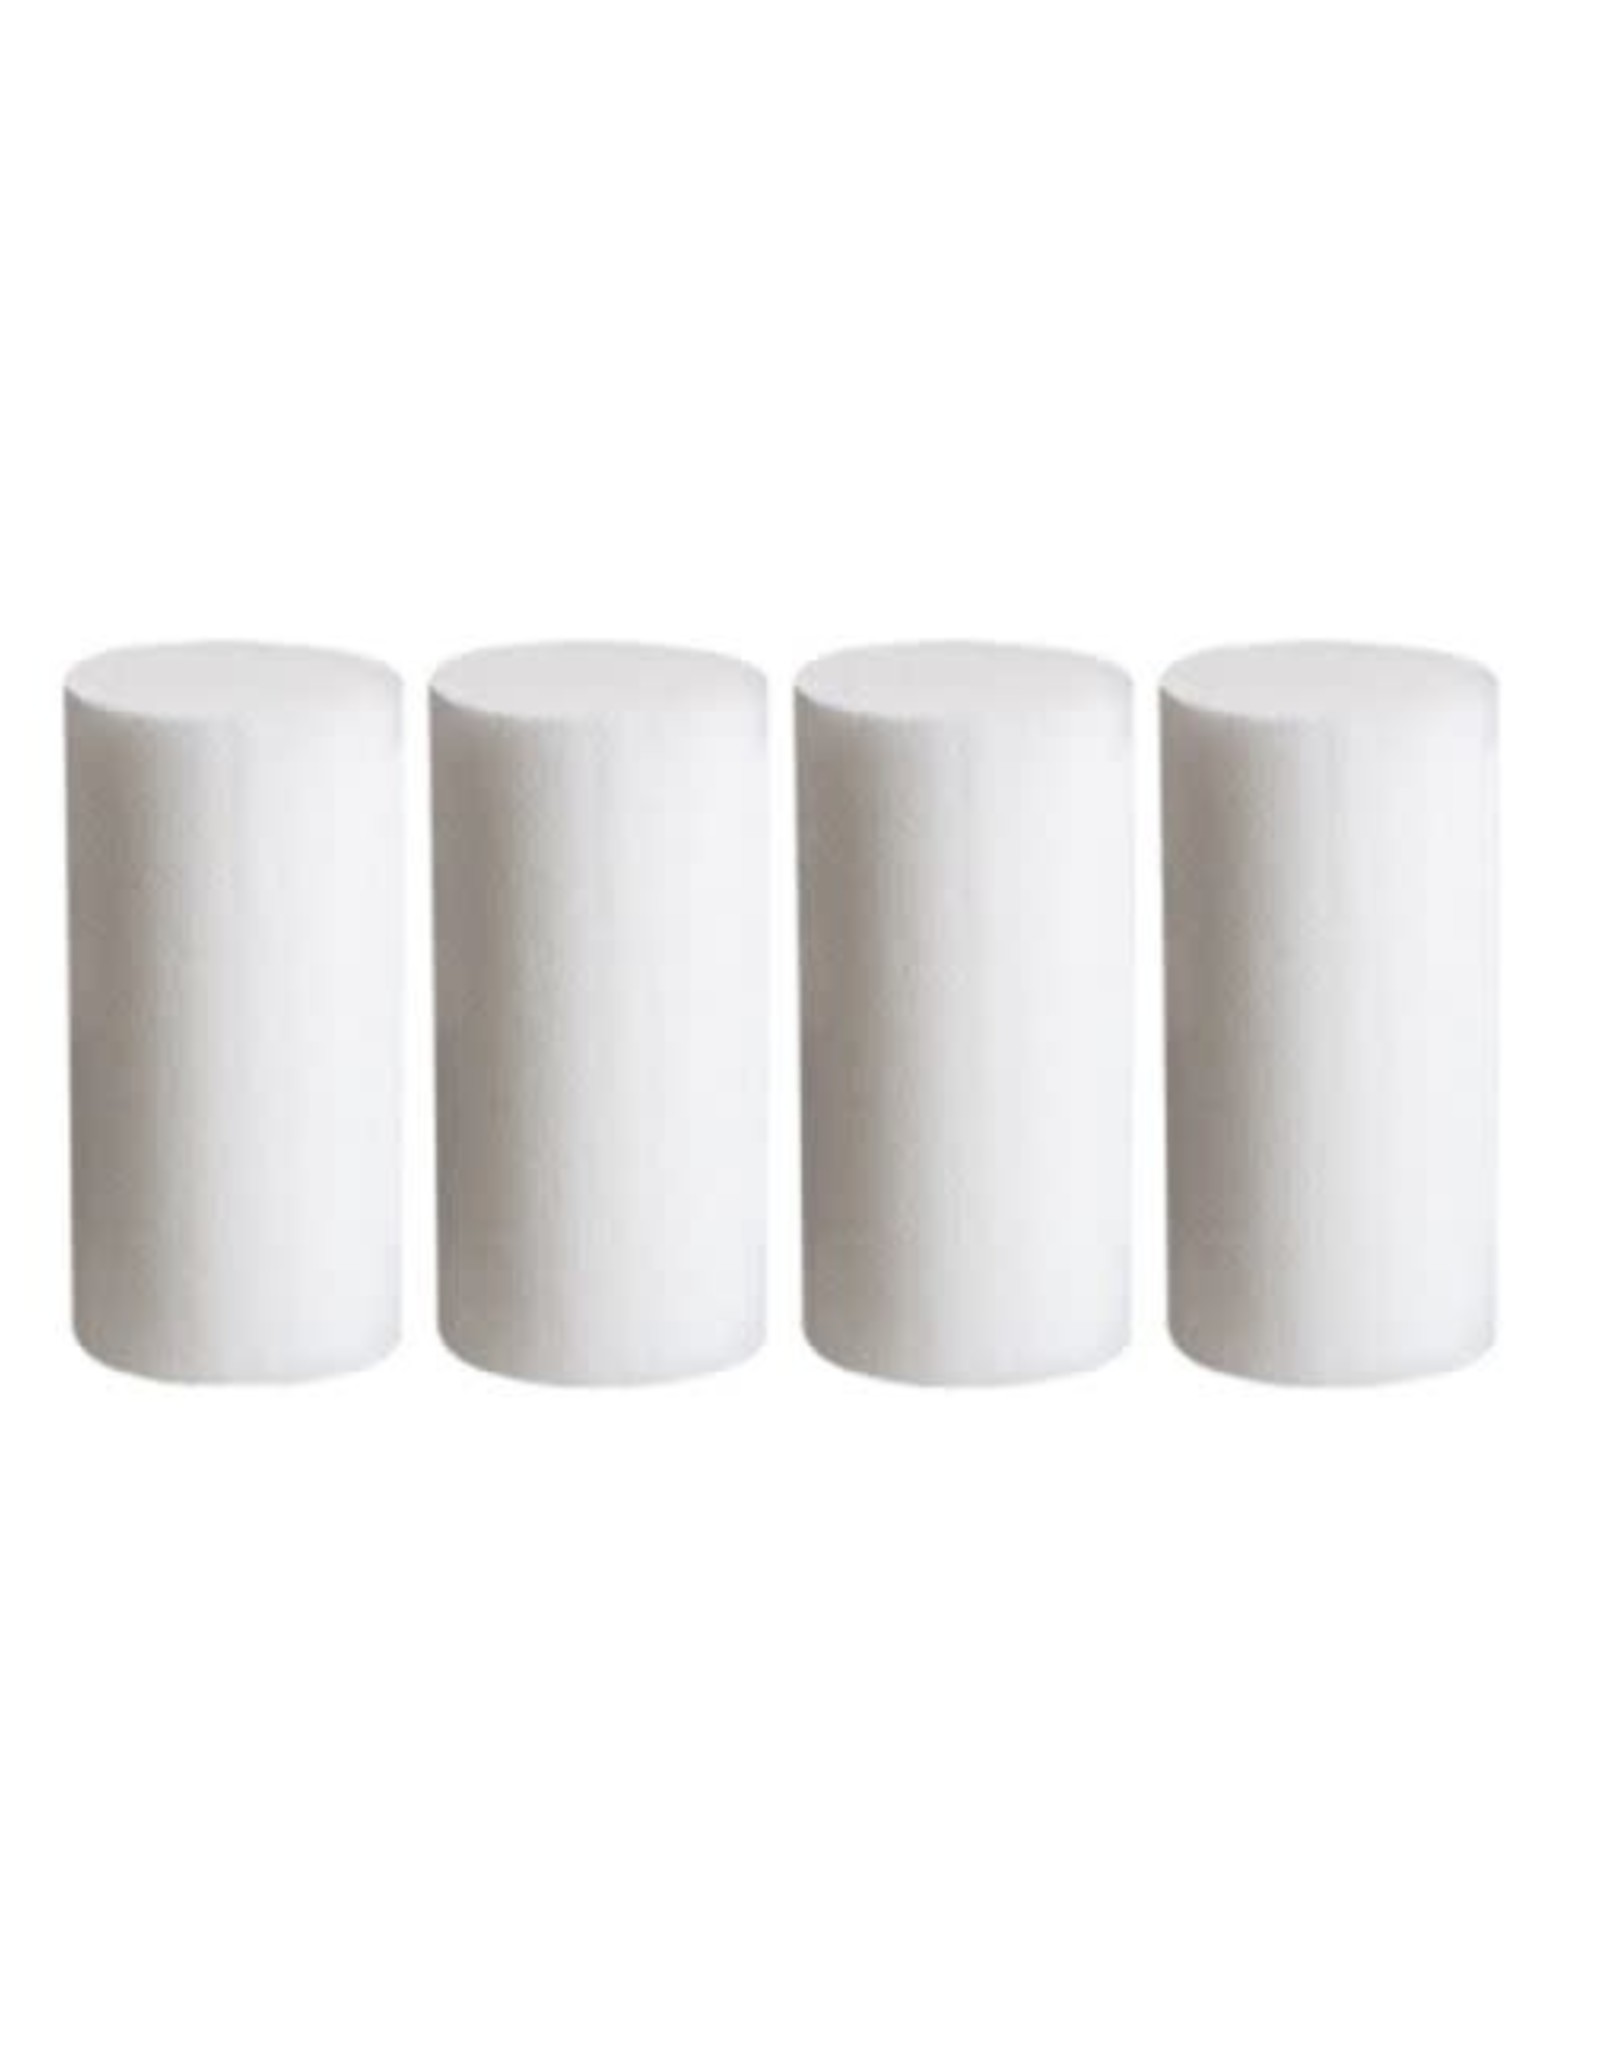 Air Venturi Replacement Filters for Nomad & Nomad II Compressors - 4 Count by Air Venturi | PY-A-8599